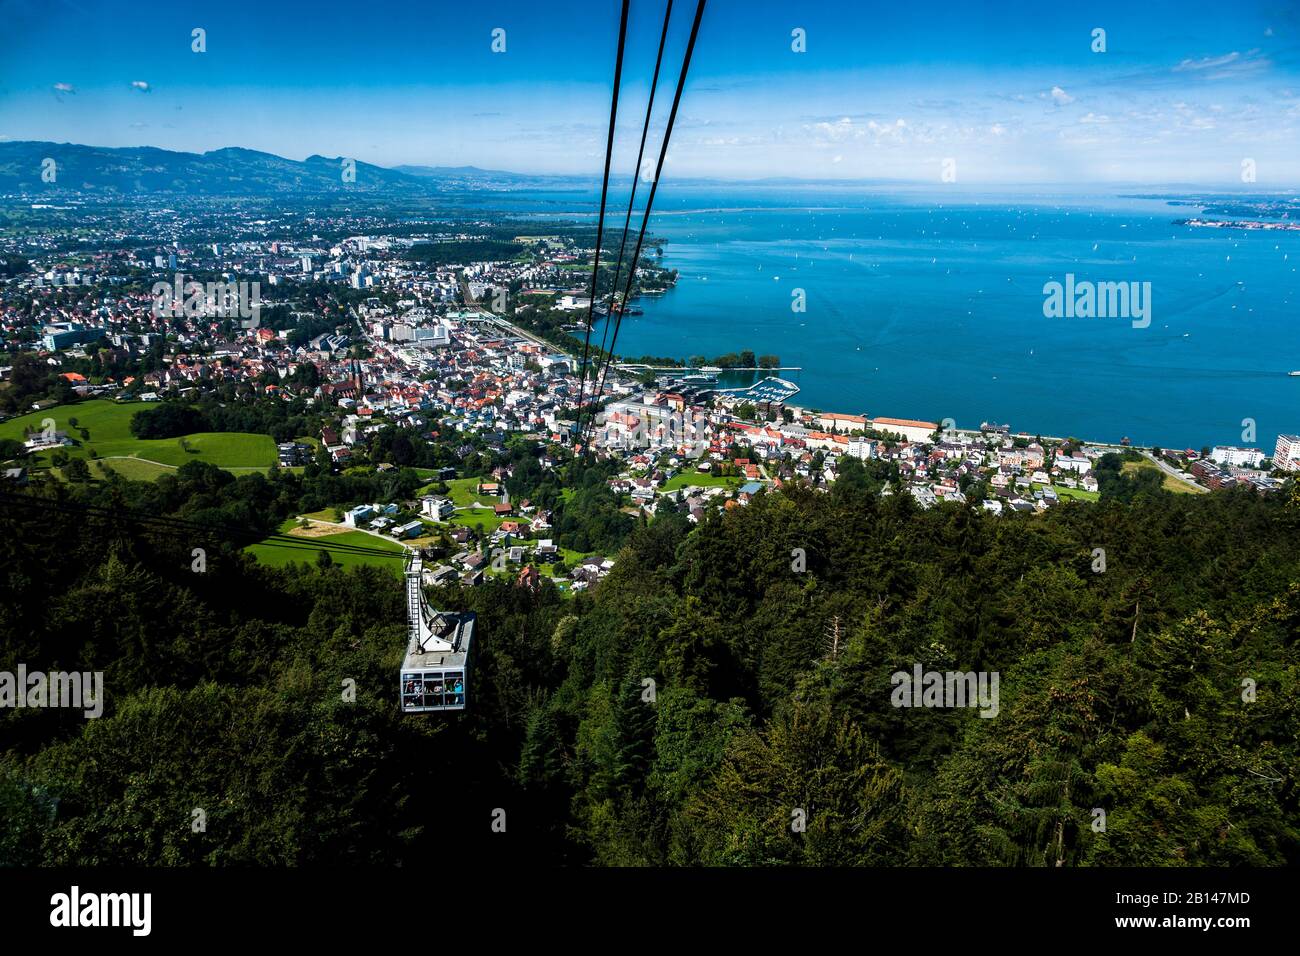 View of cable car direction Pfänder, Constance with Lake Constance with Rhine inflow and deep blue water with southern shore in the background, Bregenz, Vorarlberg, Austria, Europe Stock Photo